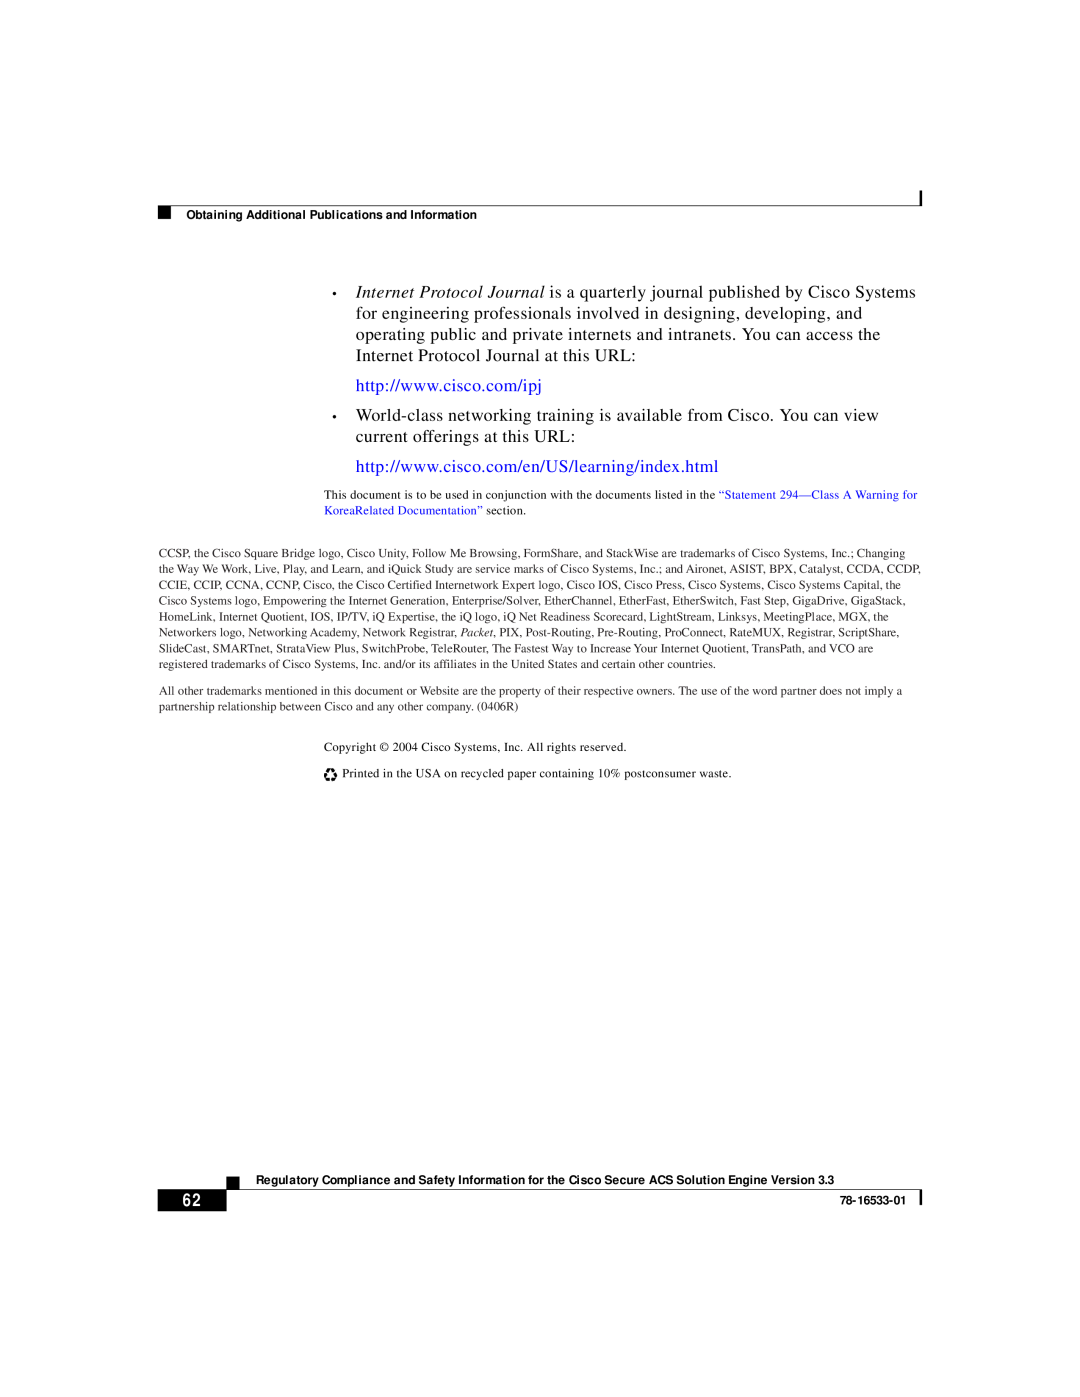 Cisco Systems CSACSE-1112-K9 manual Copyright 2004 Cisco Systems, Inc. All rights reserved 